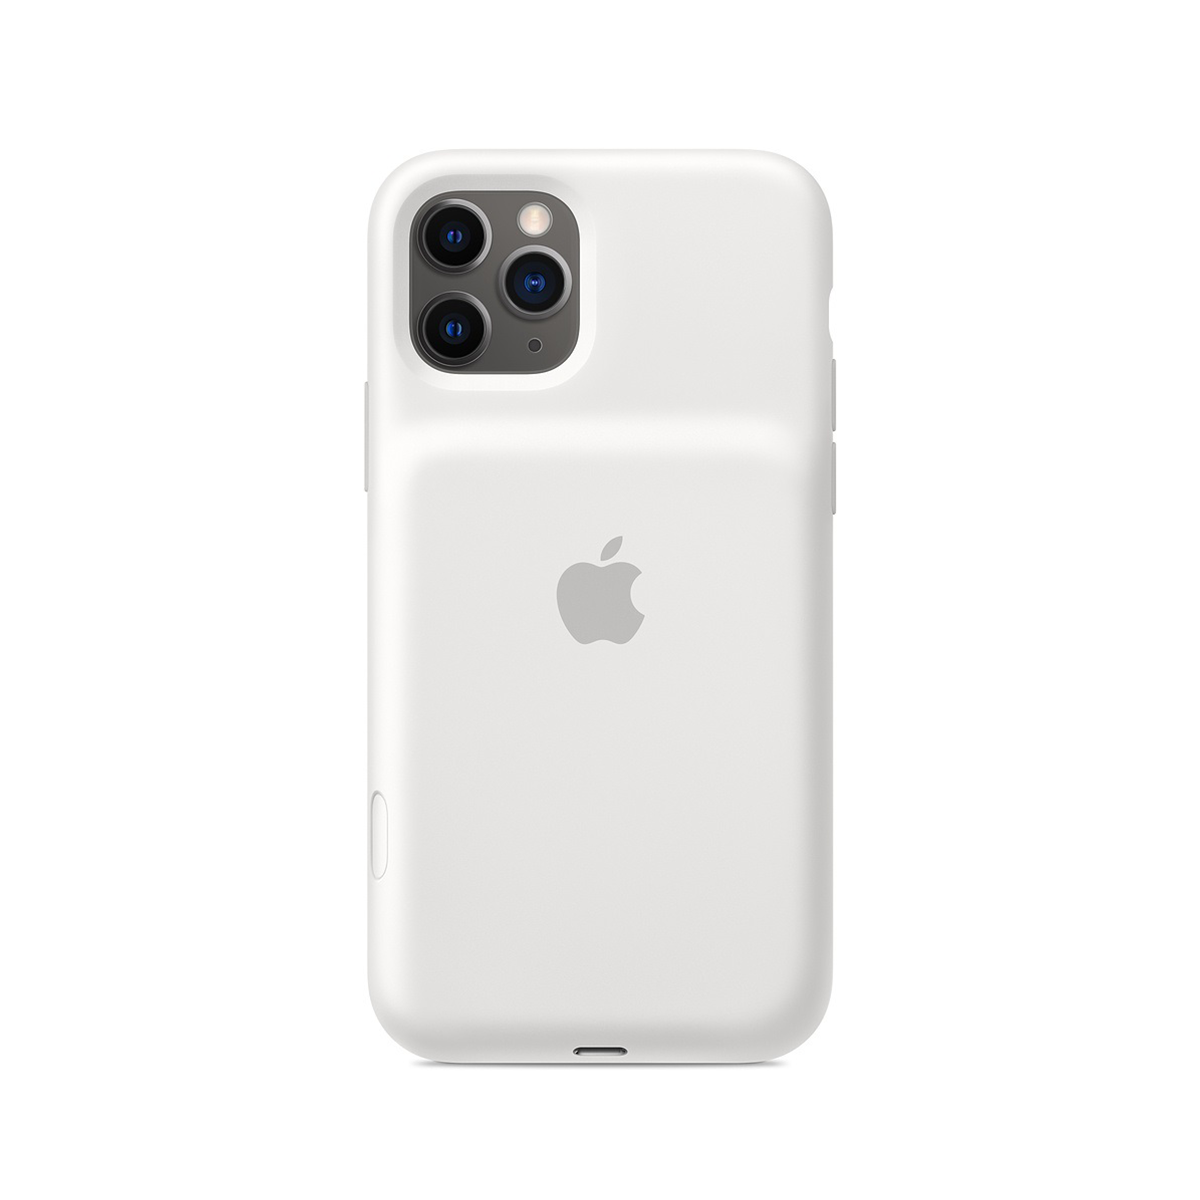 iPhone 11 Pro Smart Battery Case - White